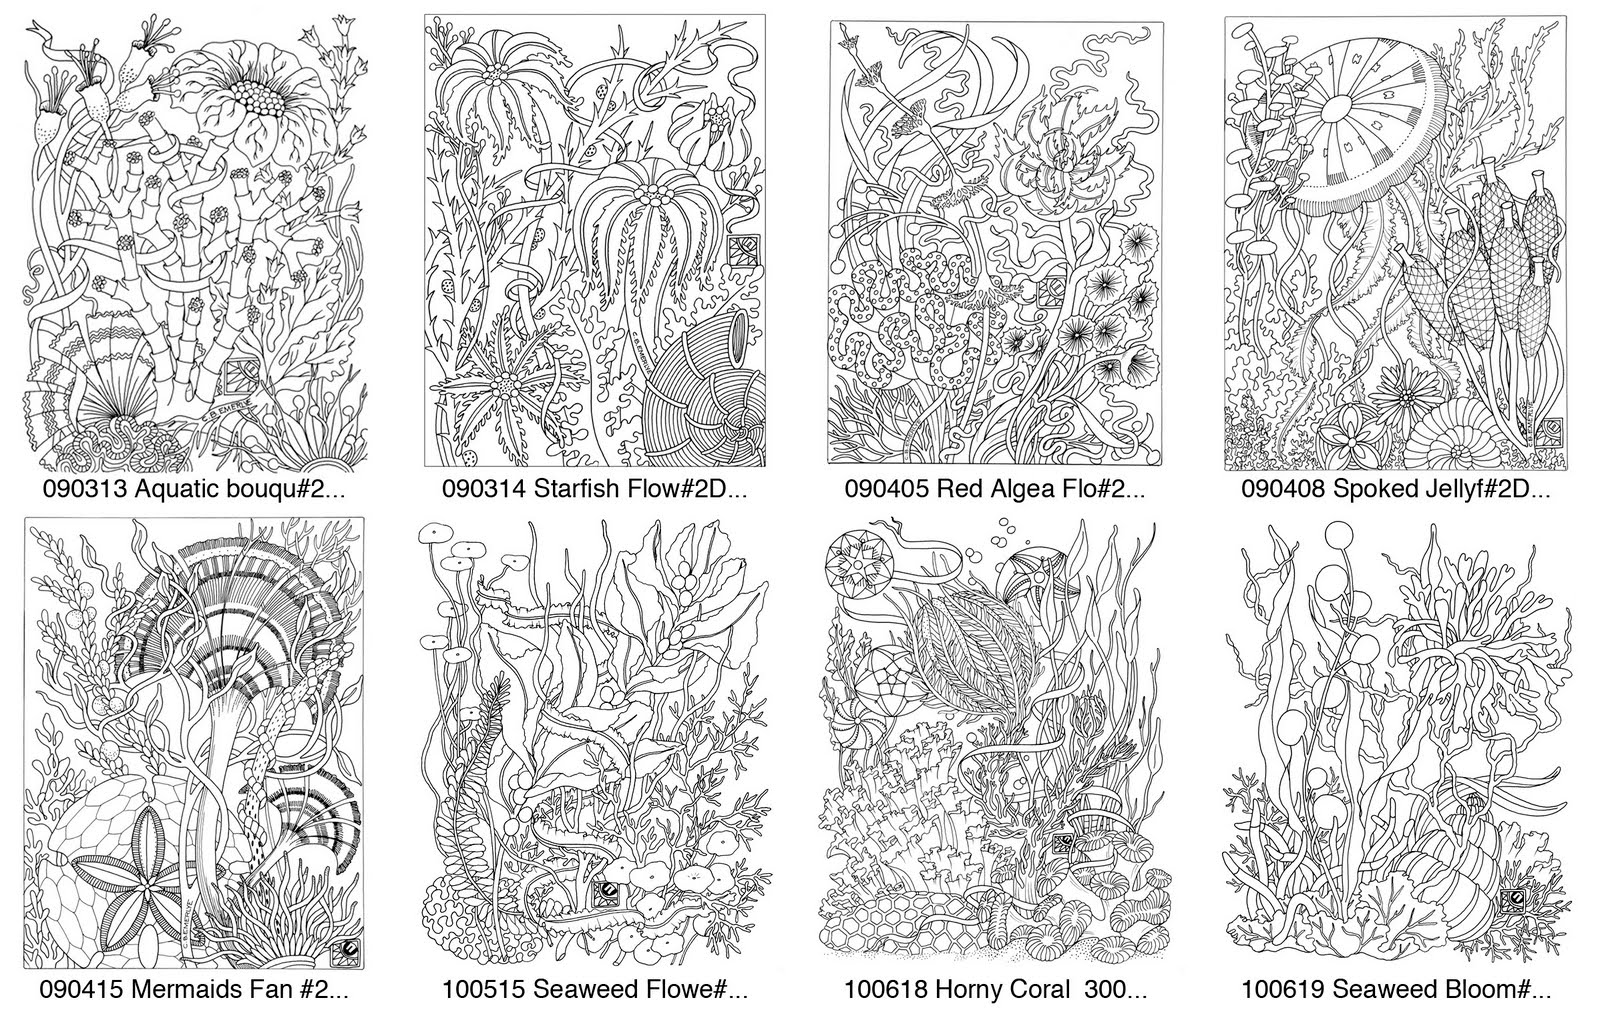  coloring pages for adults – printable coloring pages for adults – adult coloring pages – #15